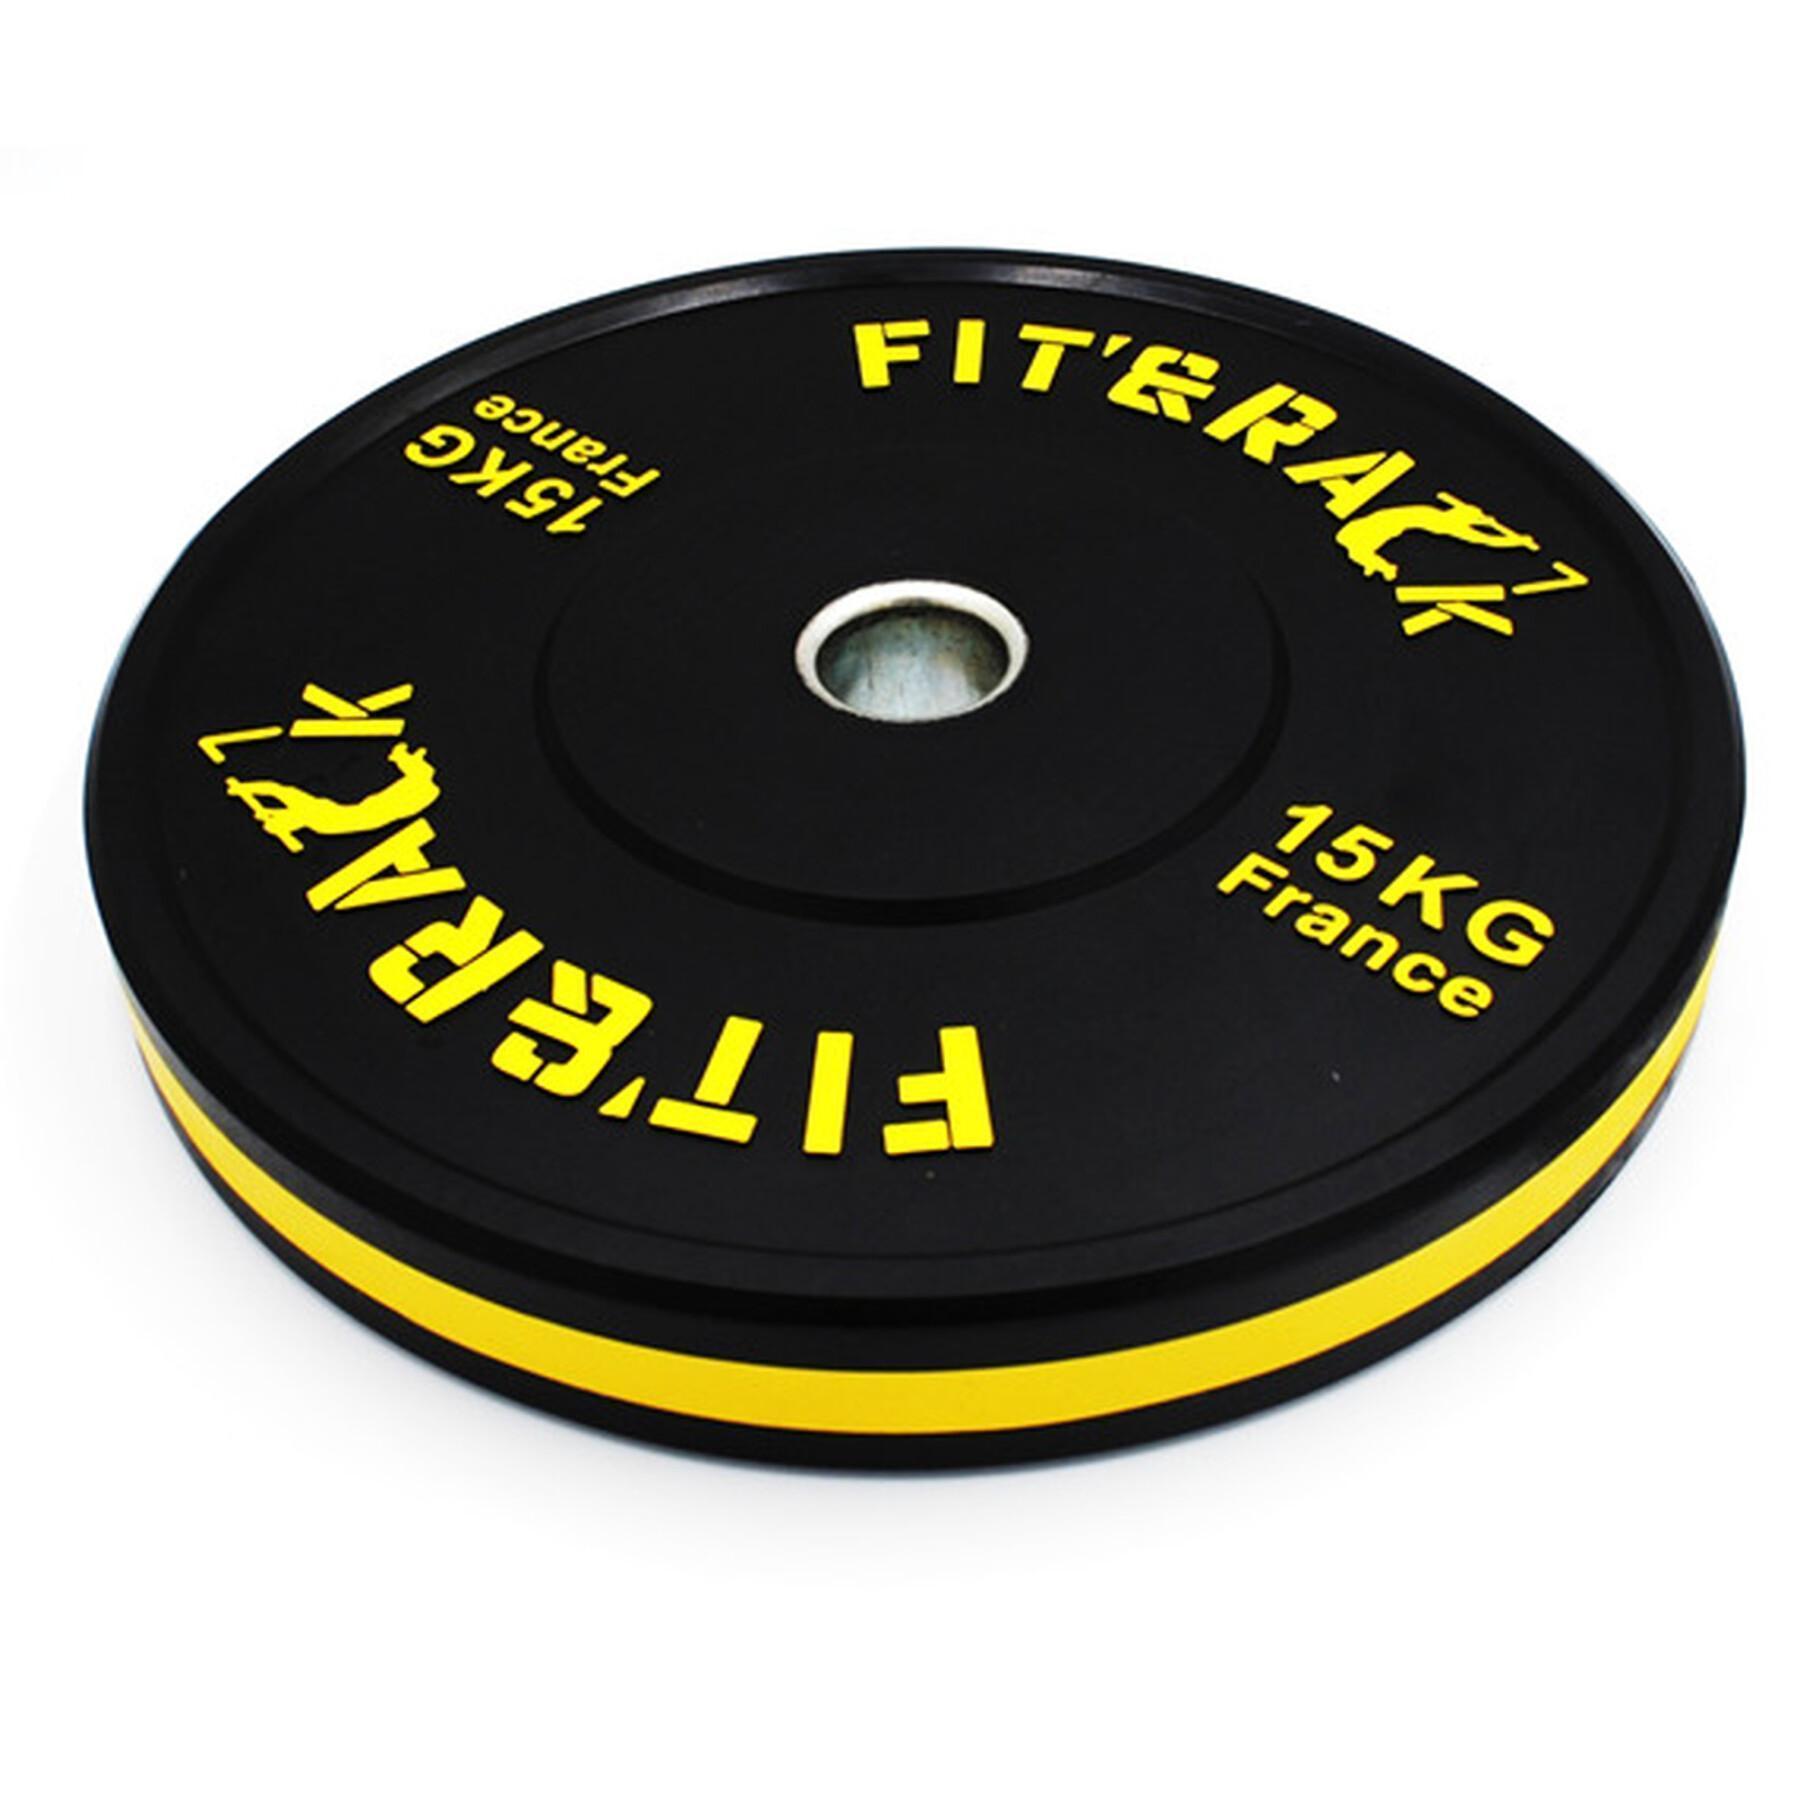 Drive weight 2.0 Fit & Rack 15kg